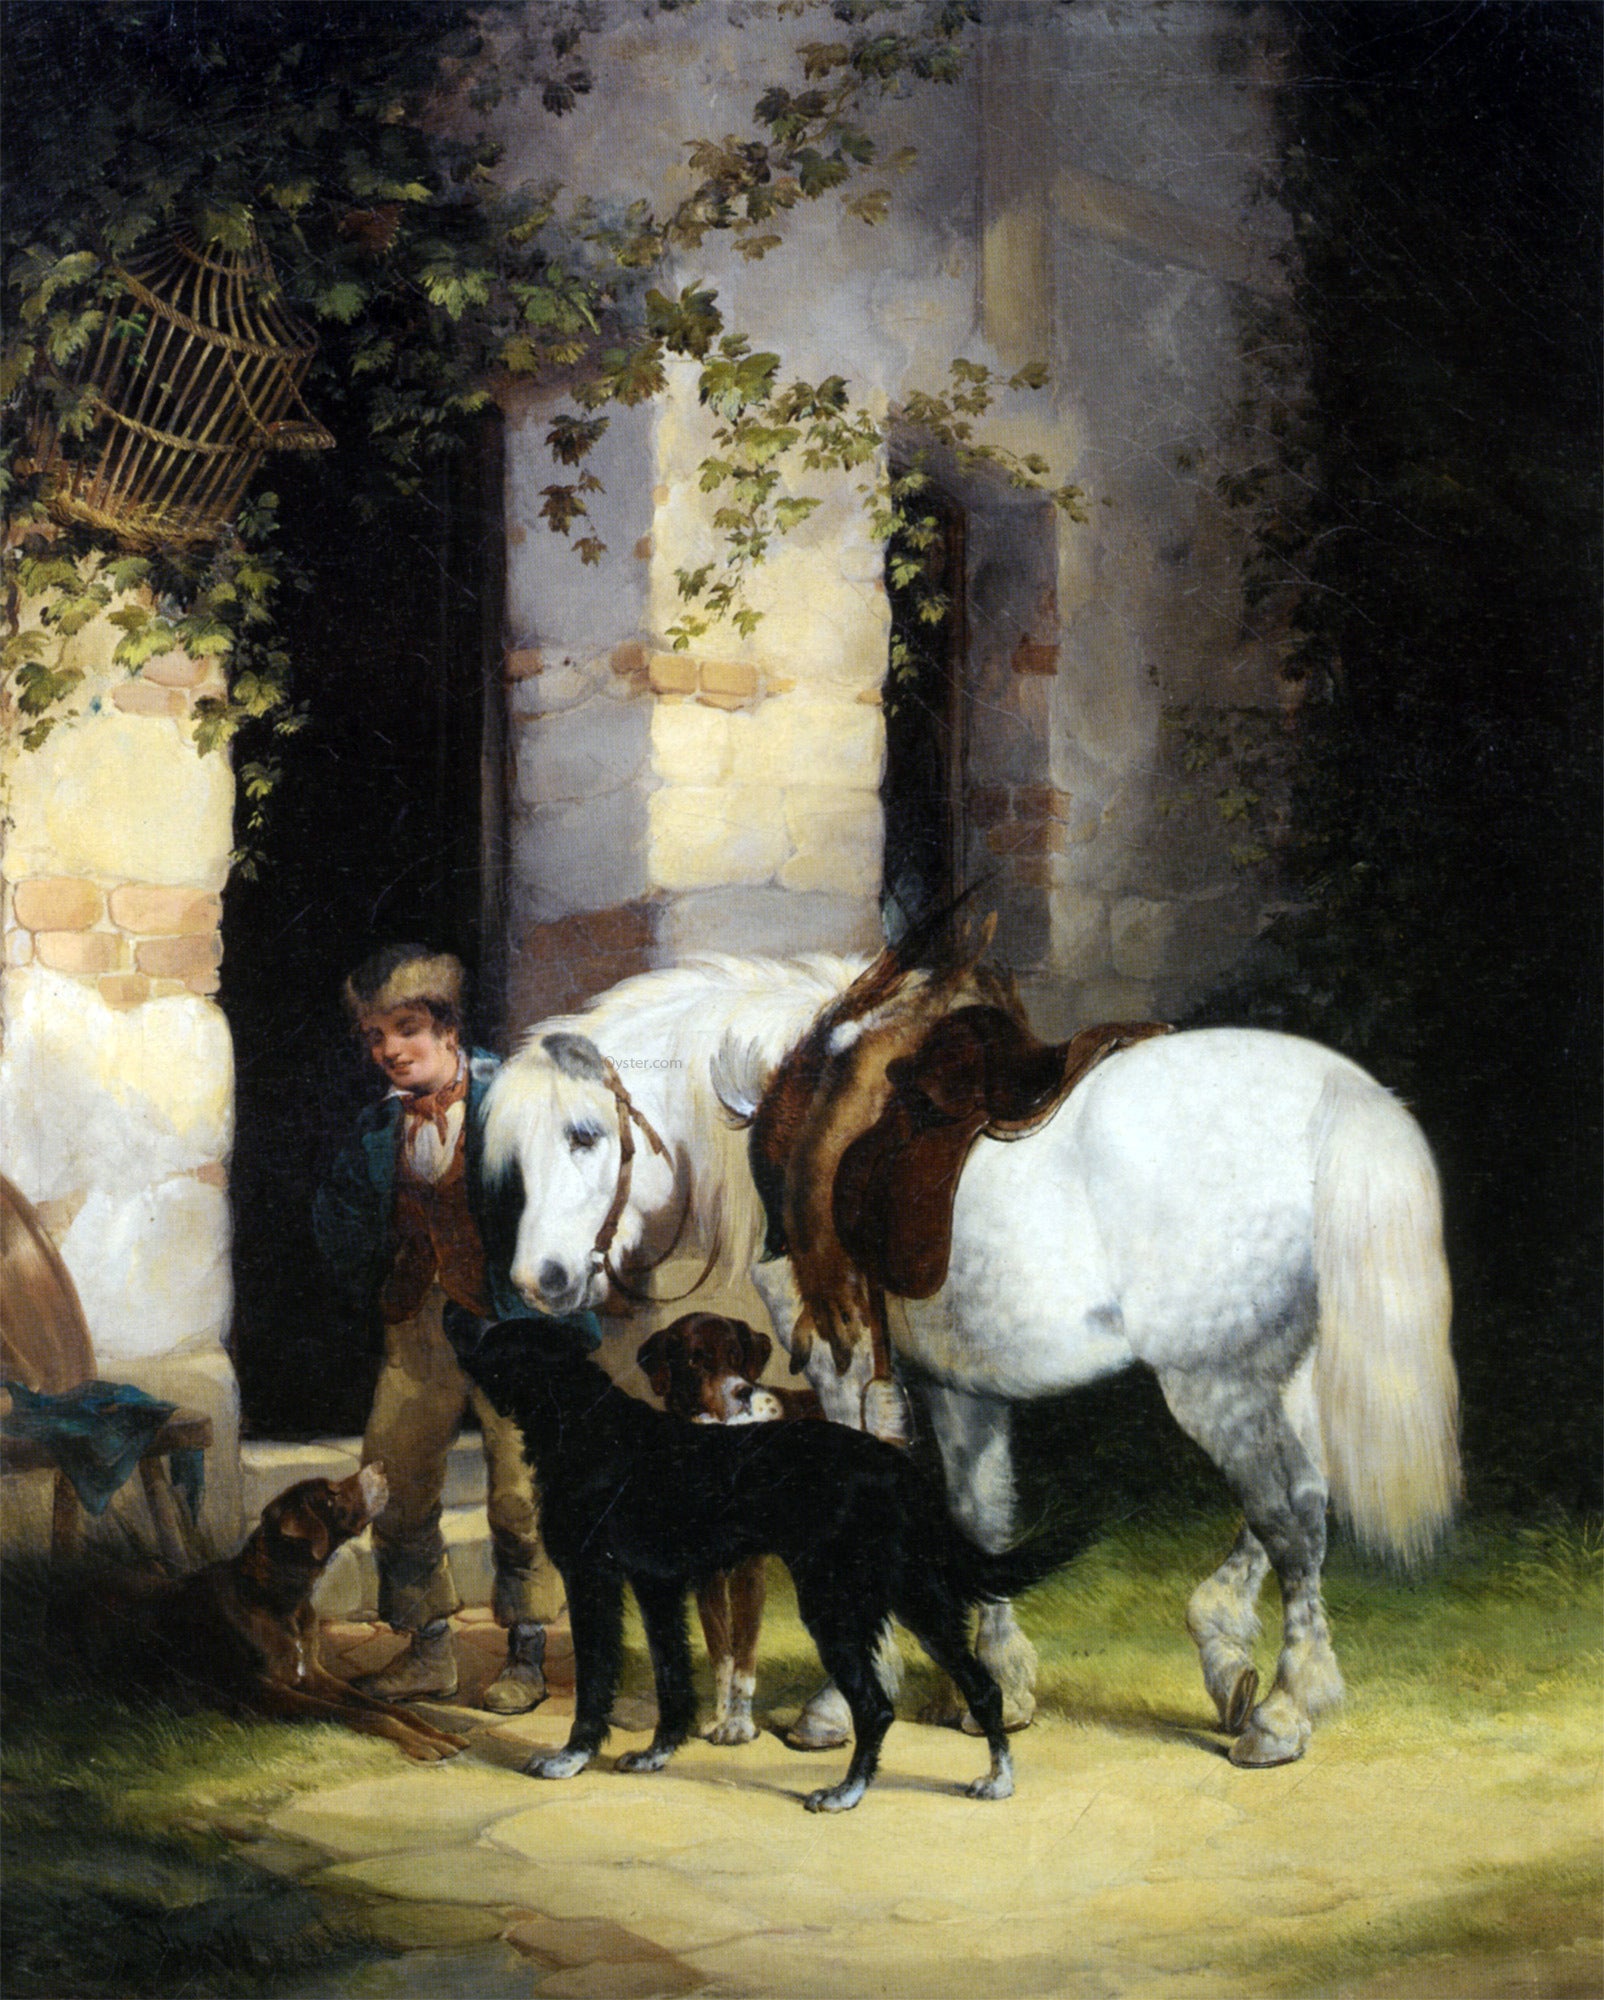  Senior William Shayer The Gamekeepers Companions - Hand Painted Oil Painting